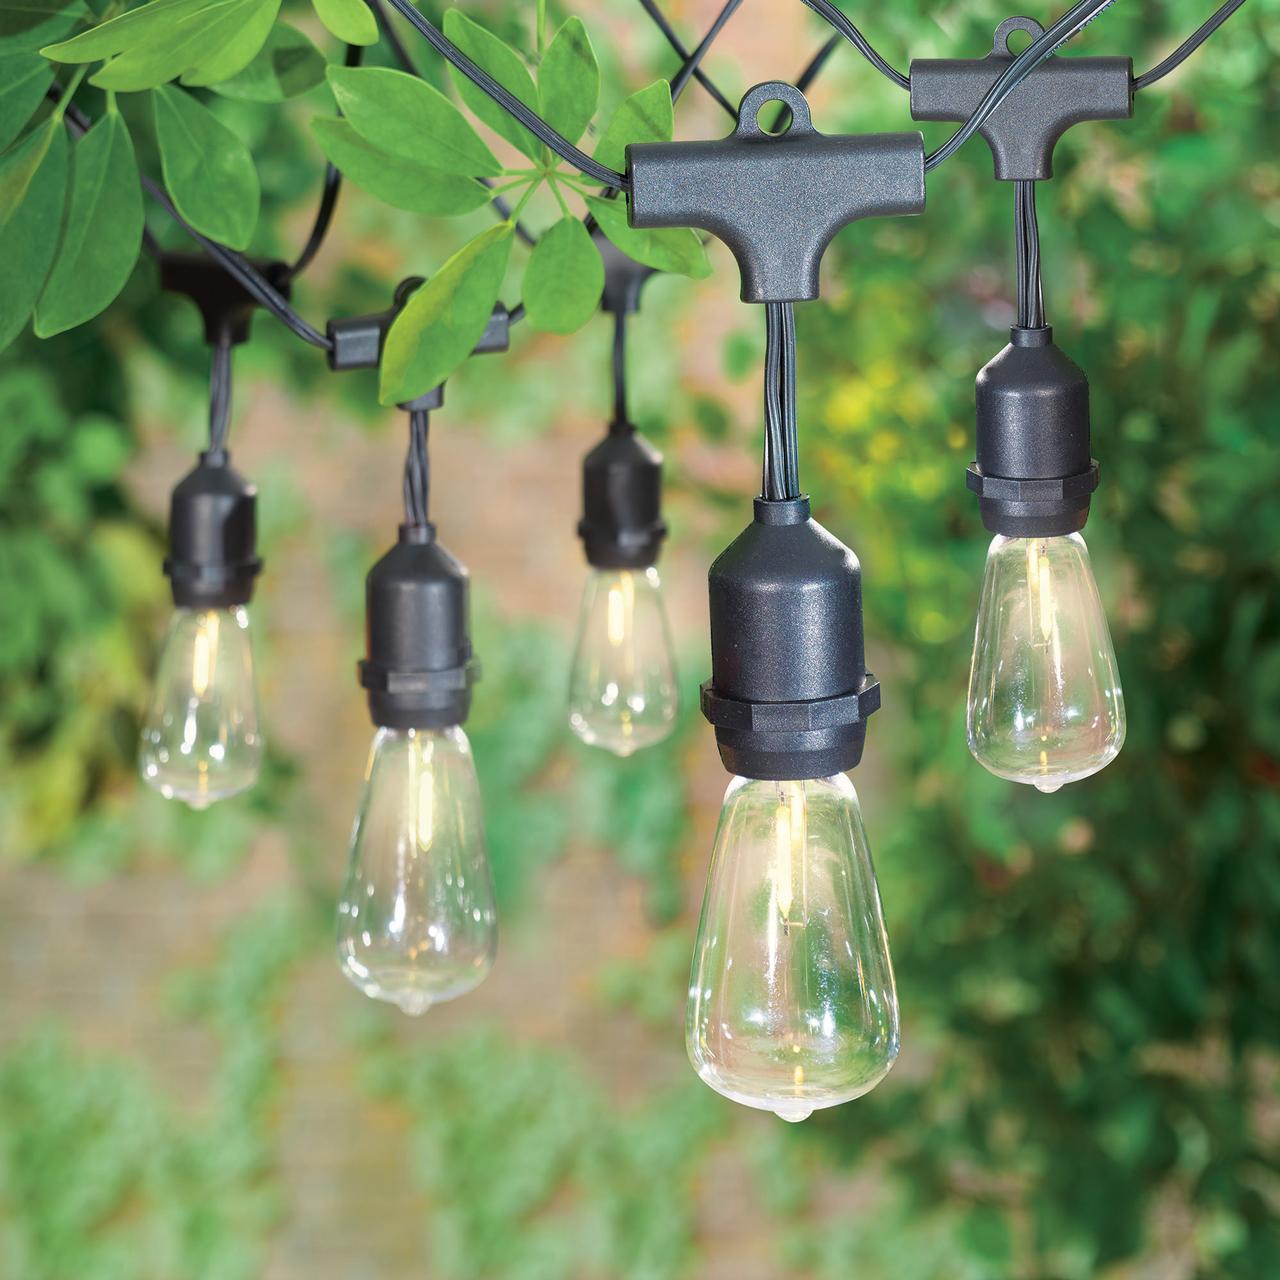 Better Homes & Gardens 15-Count Shatterproof Edison Bulb Outdoor String Lights with Black Wire - image 2 of 8